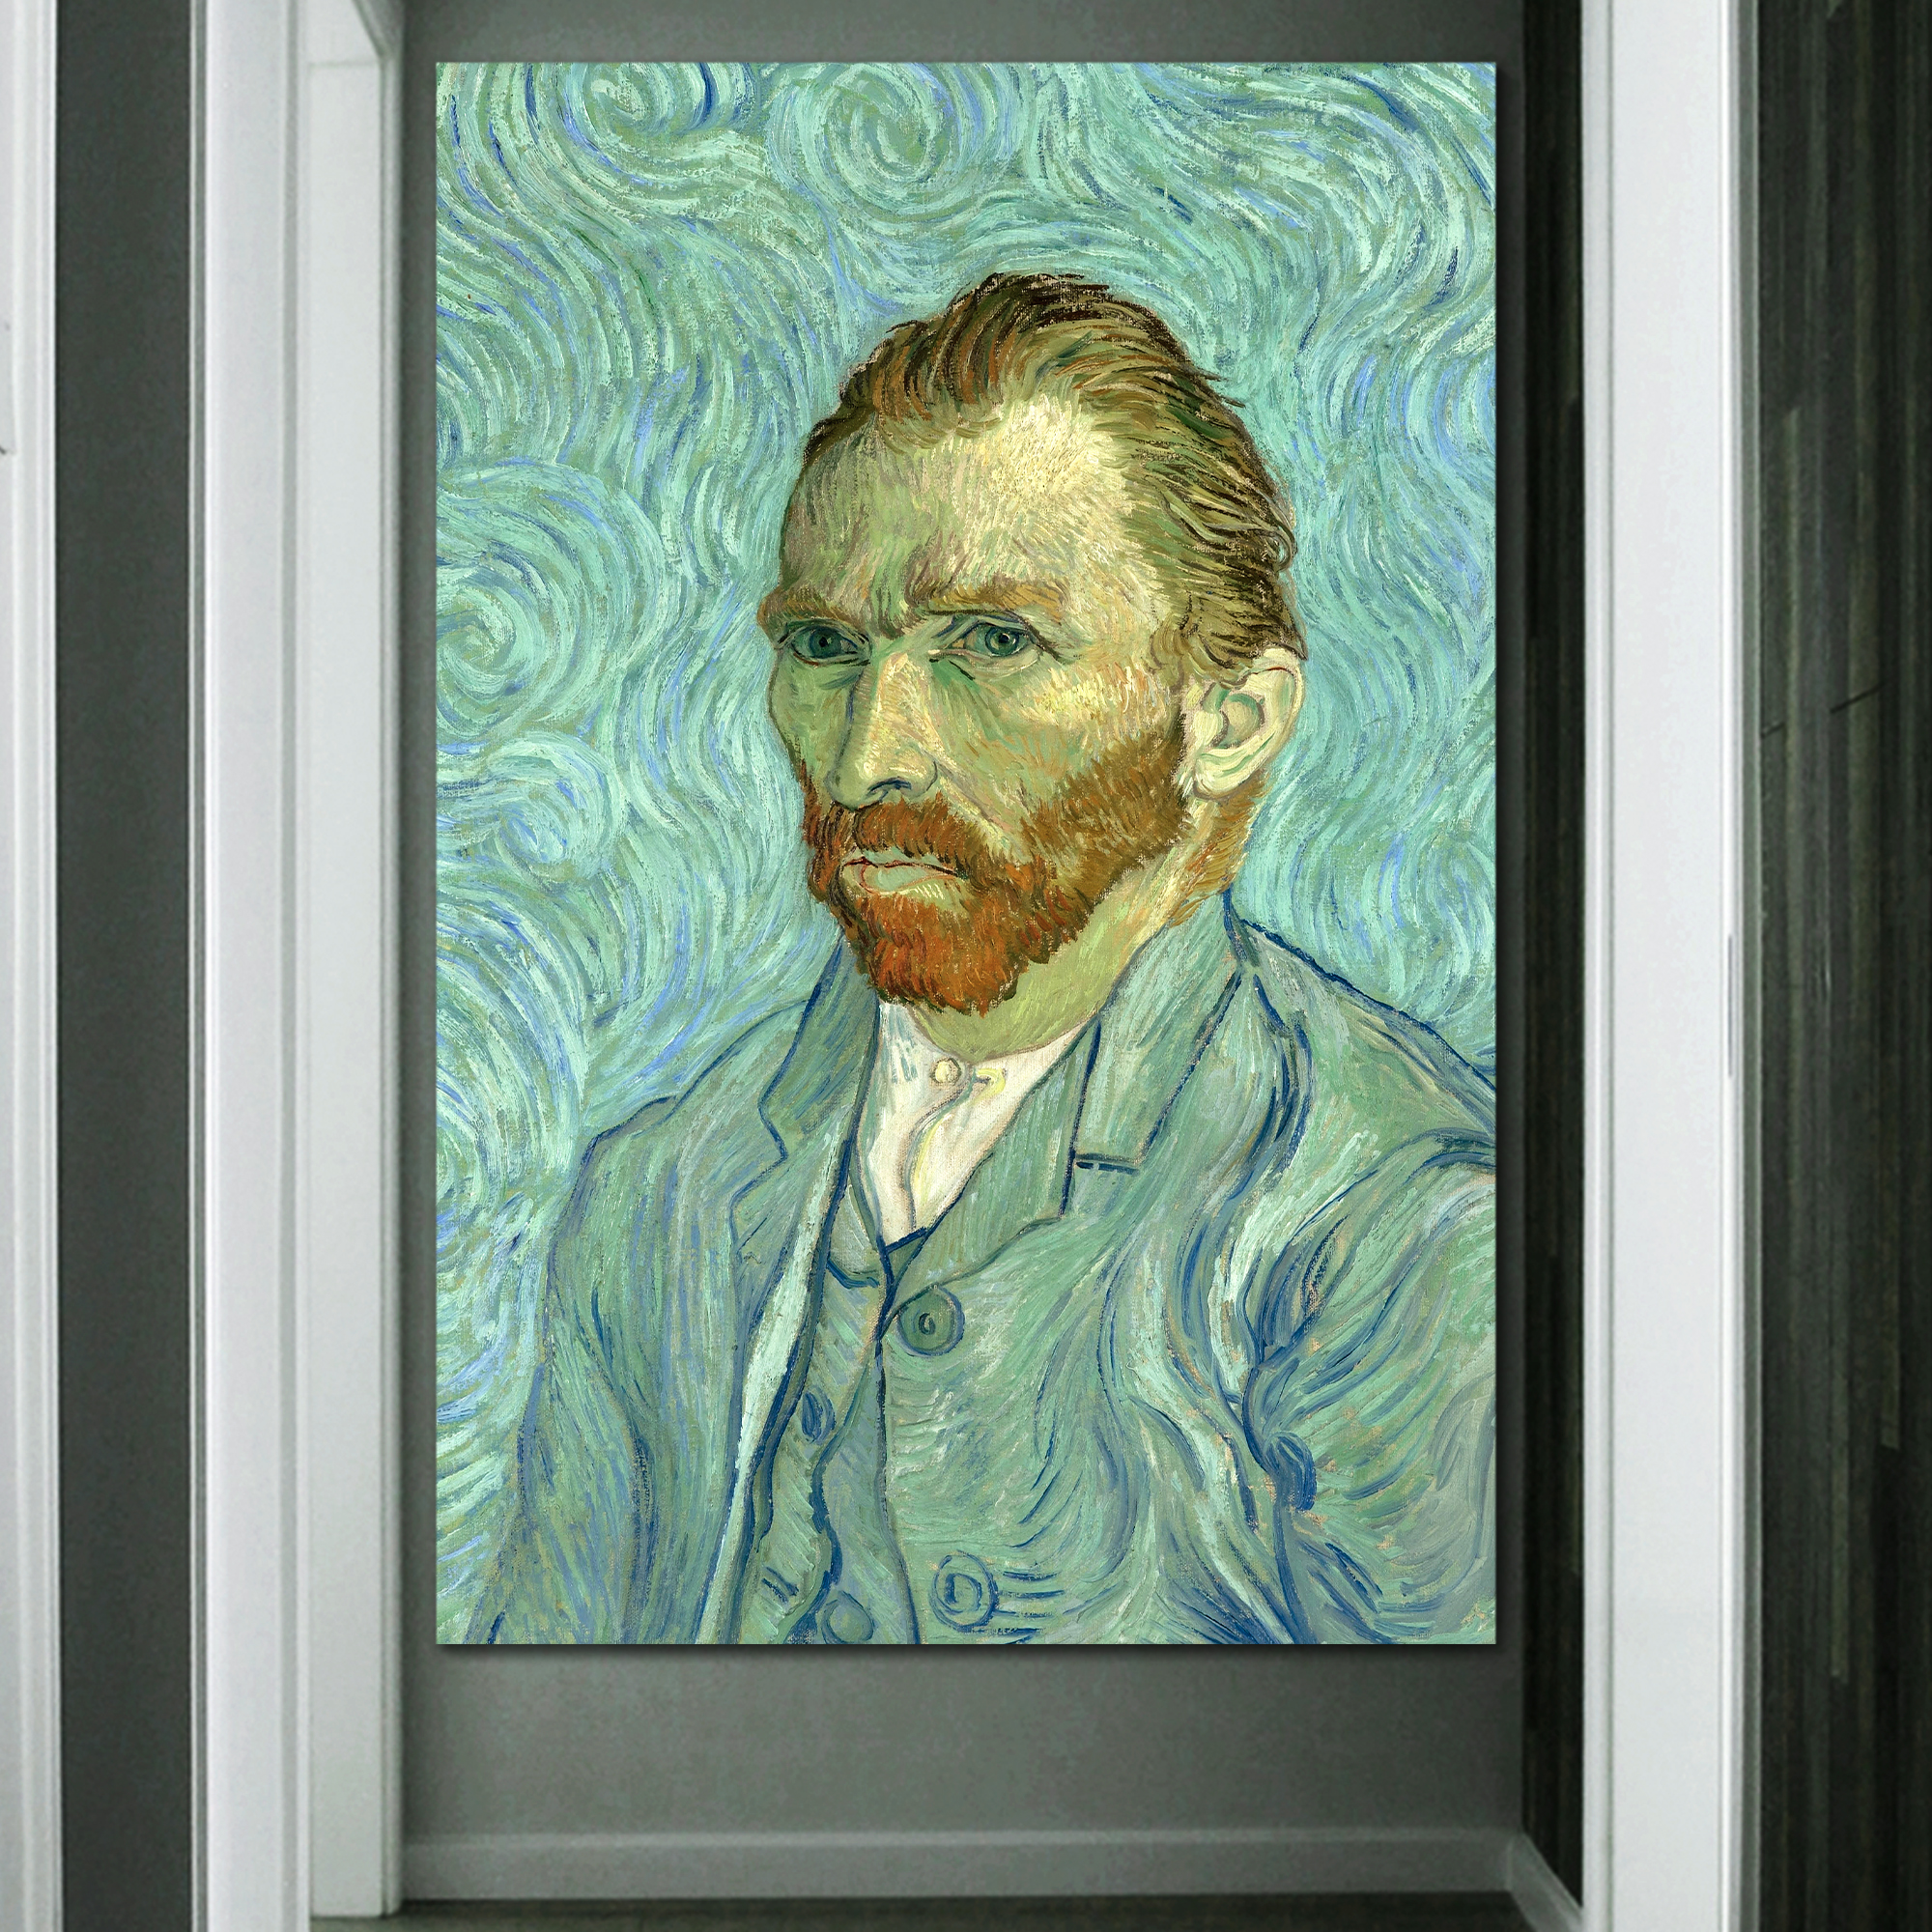 Self Portrait by Van Gogh Giclee Canvas Prints Wrapped Gallery Wall Art | Stretched and Framed Ready to Hang - 16